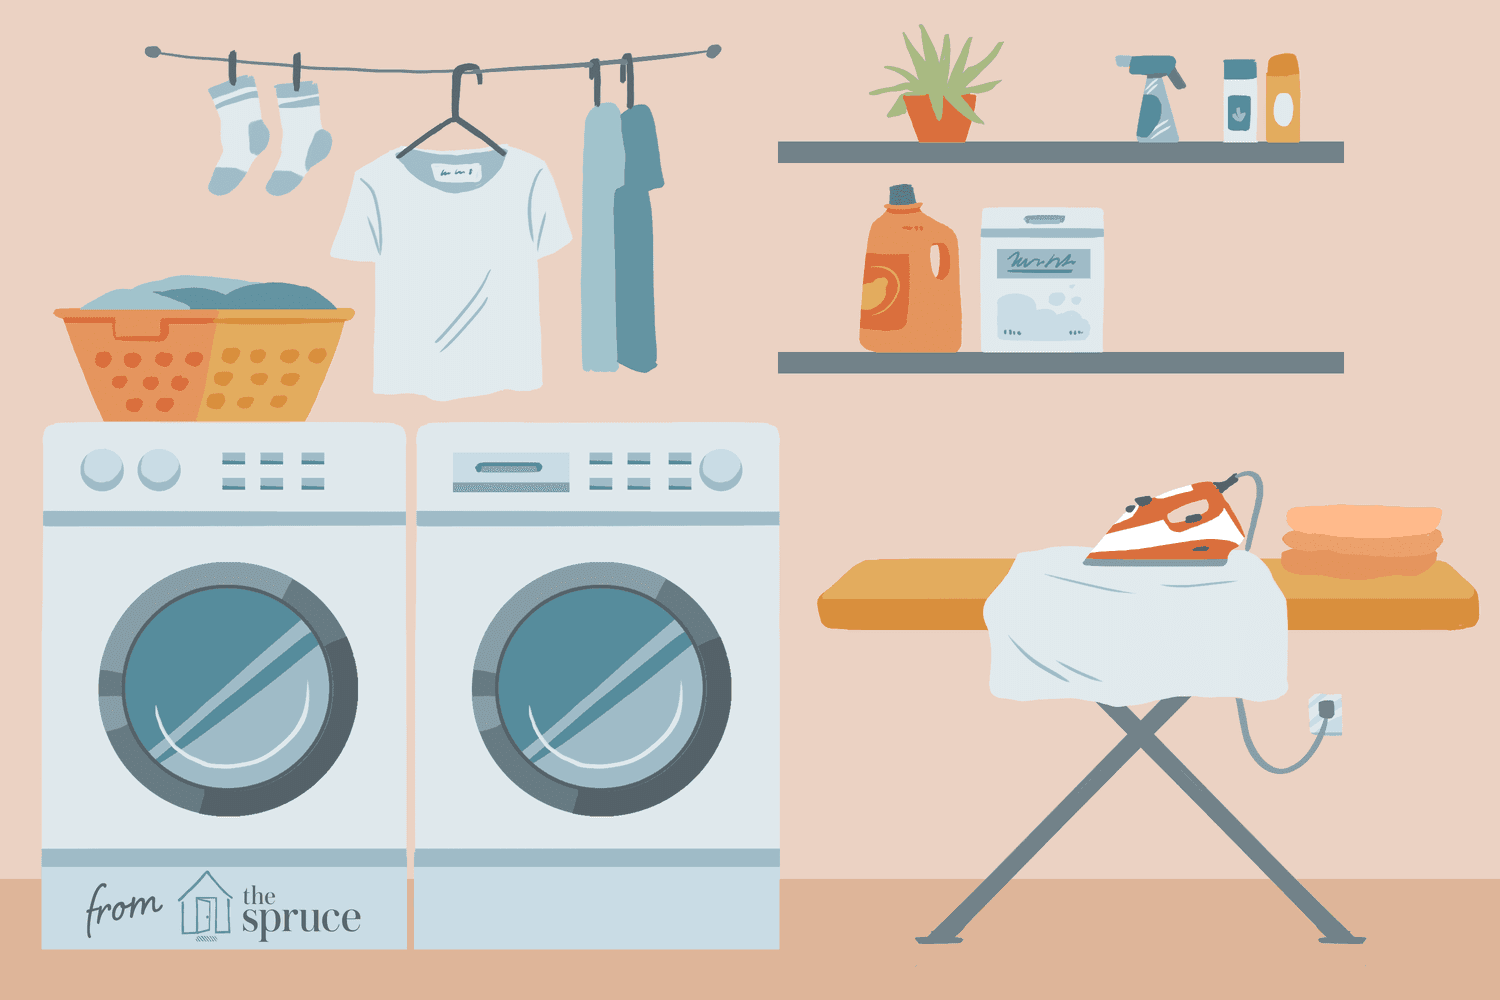 how to do laundry